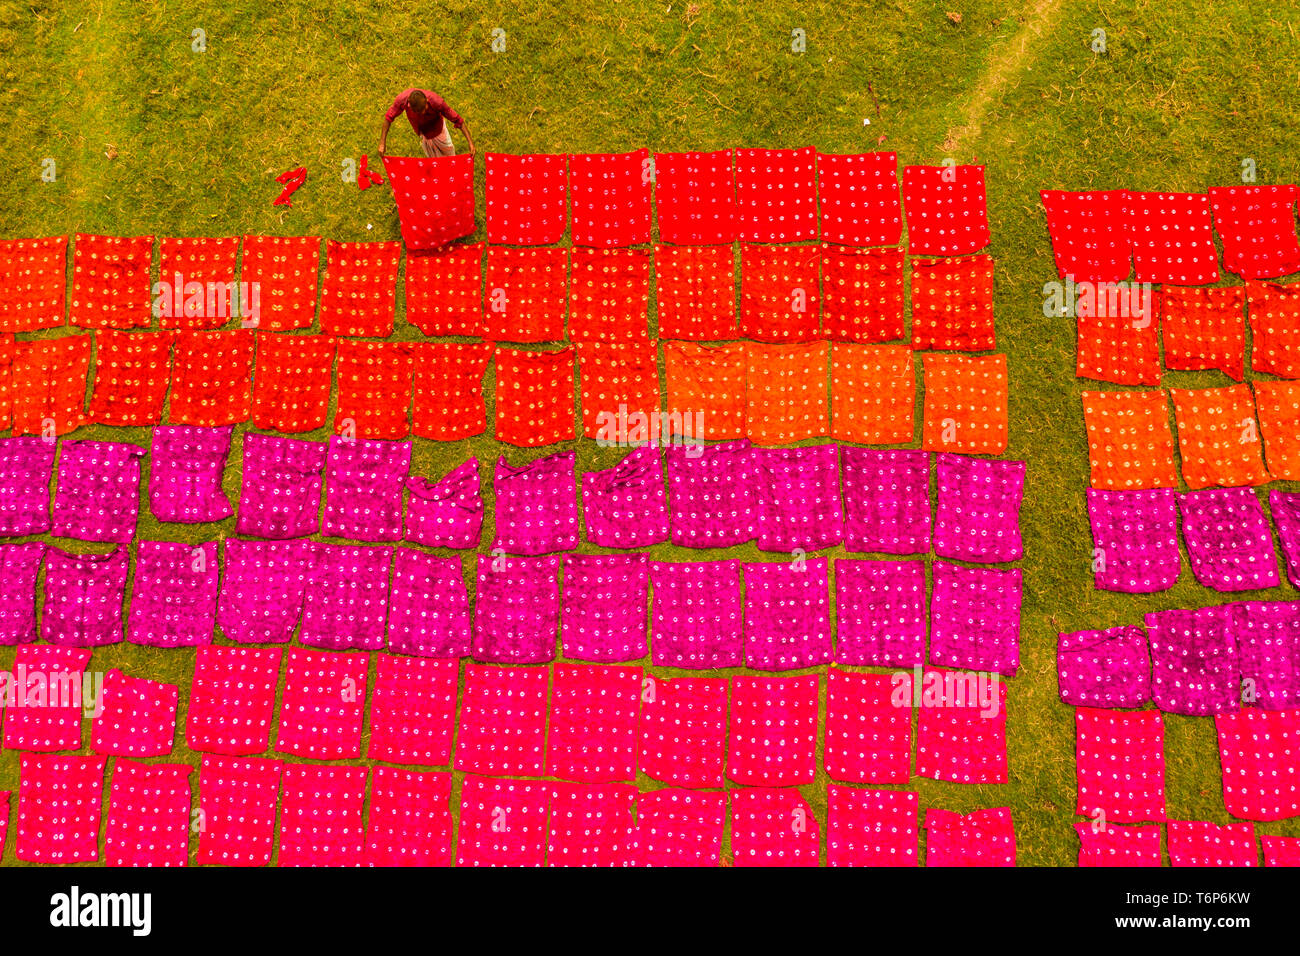 (EDITORS NOTE: Image taken with drone) Workers seen unfolding hundreds of meters of freshly dyed bright red cloth across a field as part of the process of creating traditional Batik.  In this techniques wax is used to create stunning patterns on a huge scale. The wax prevents the dye from penetrating the area it is placed on, allowing workers to create amazingly complex multi-coloured designs. They then soak the cloth in a dying emulsion before rolling the large cotton, silk, or wool cloths in the hot sun to dry. Stock Photo